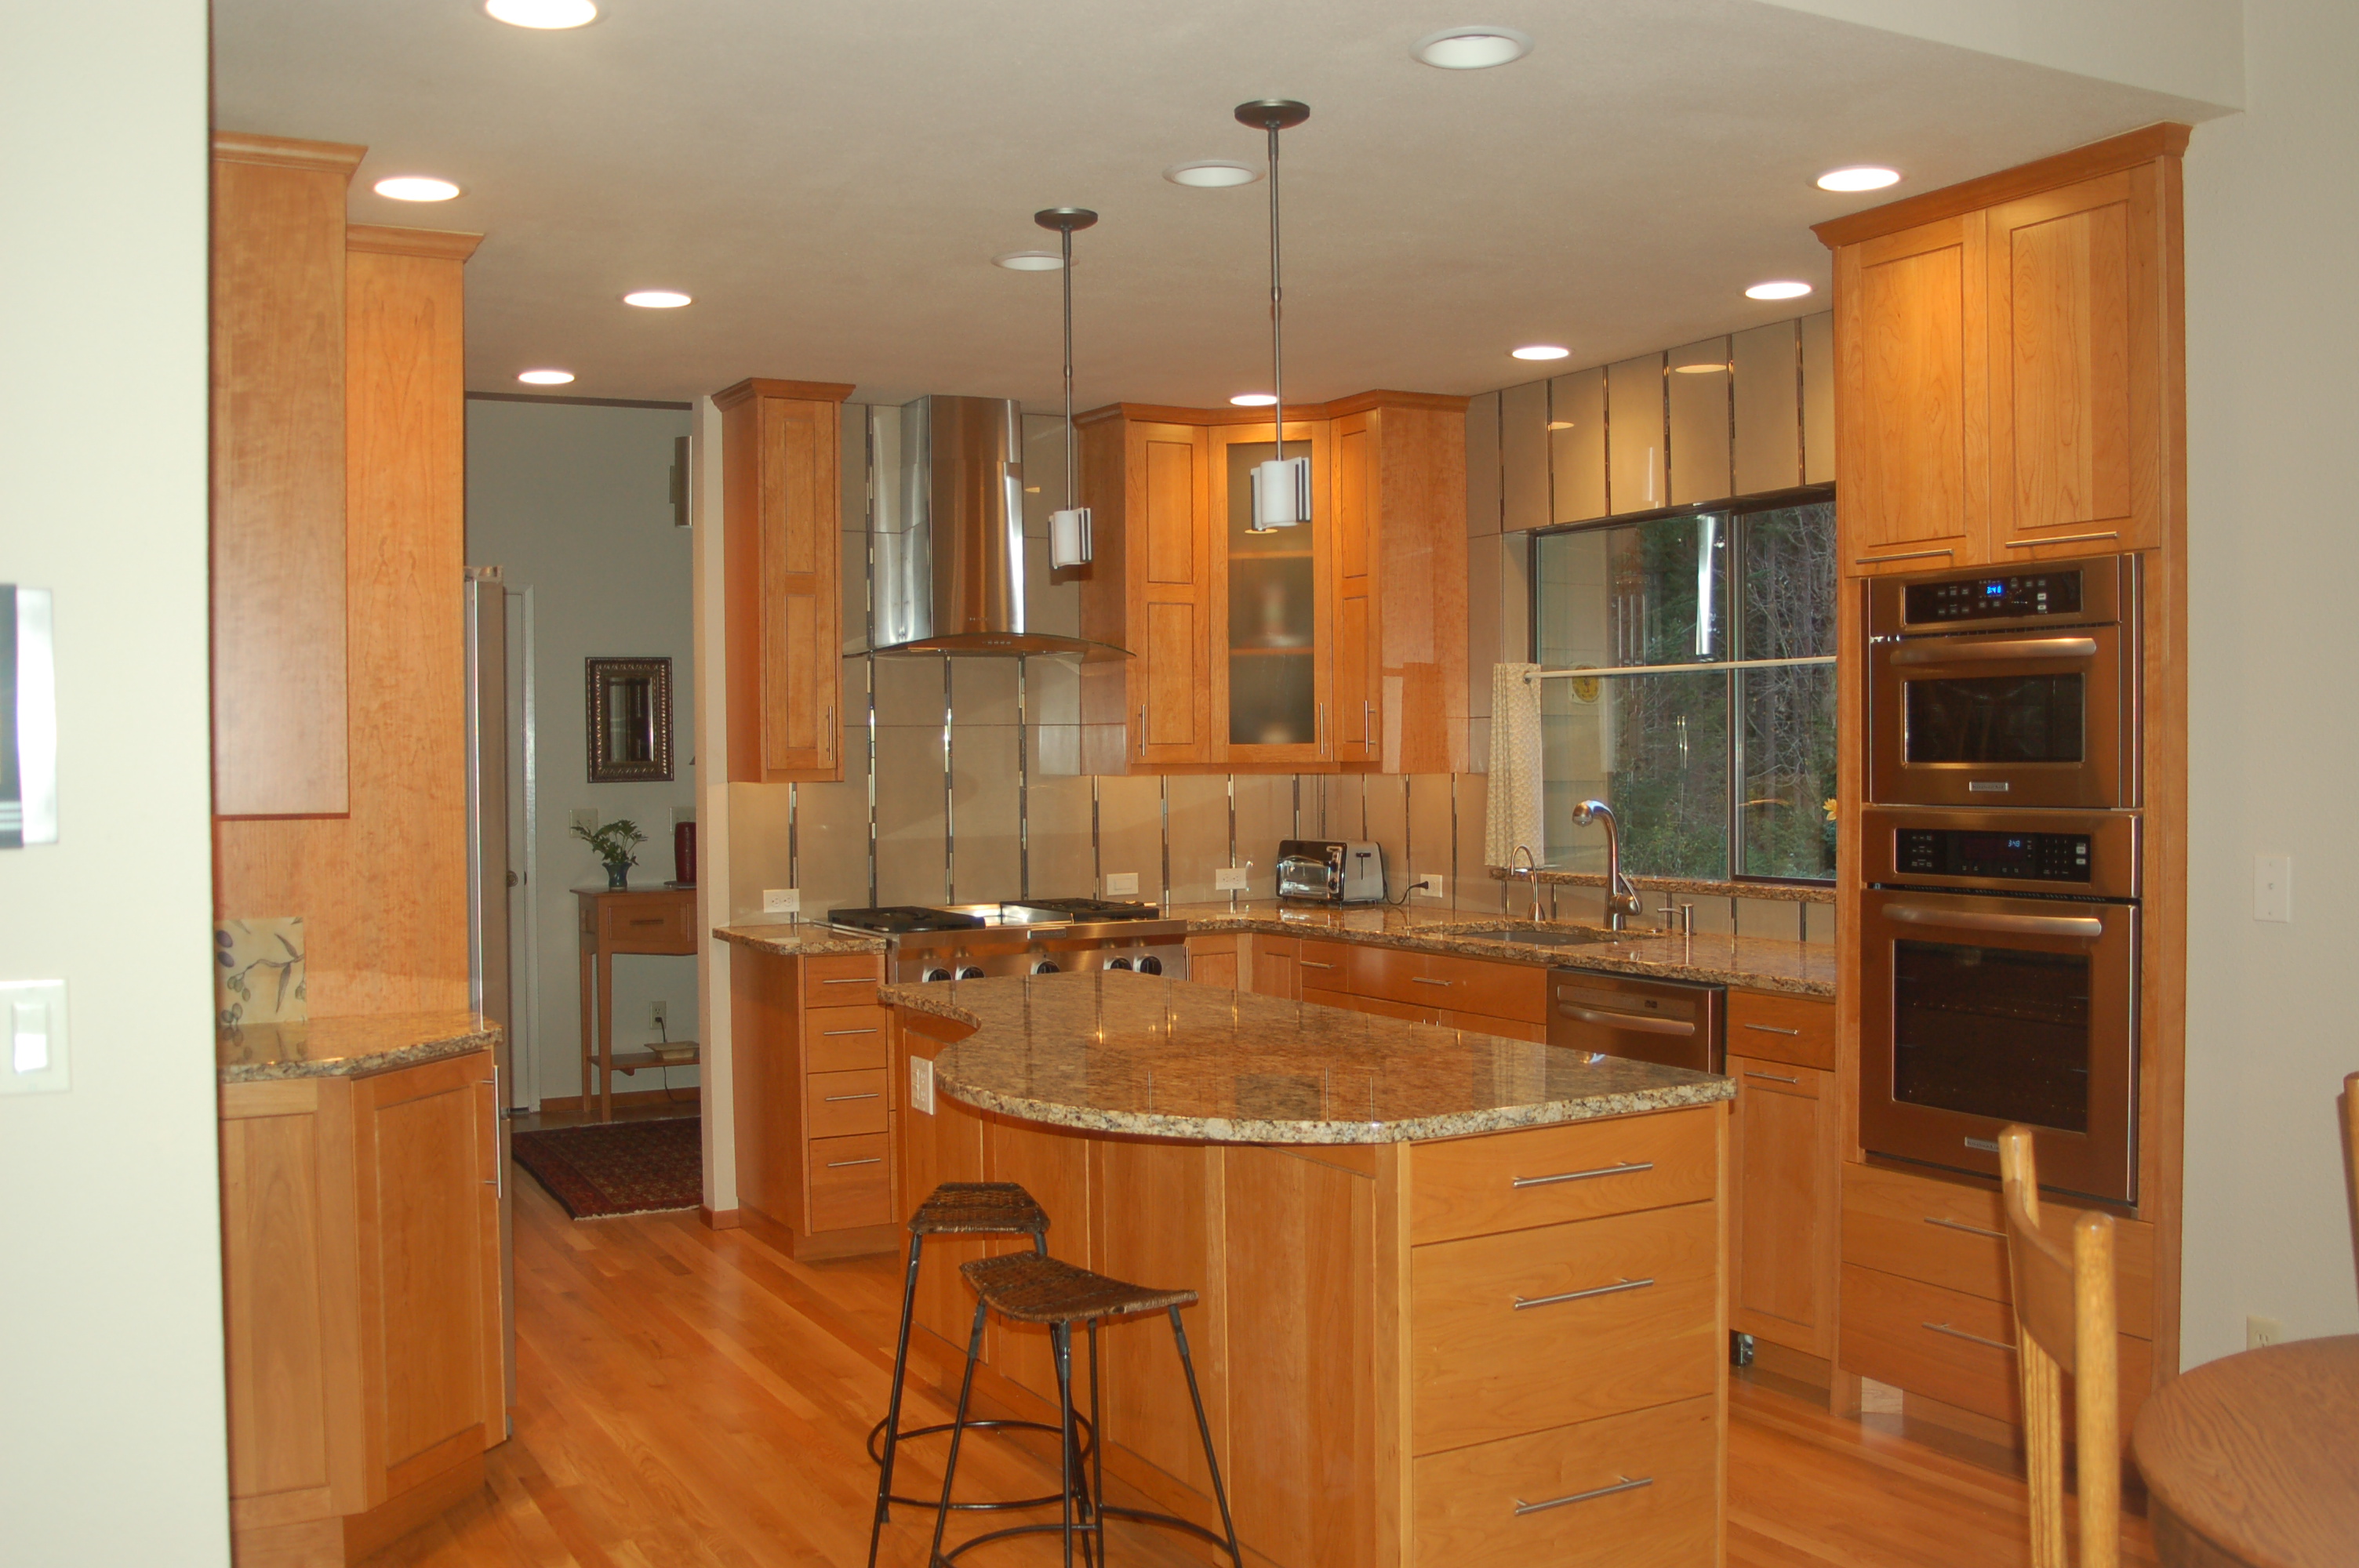 Kitchen Remodel Part Iii Choosing Cabinets Rose Construction Inc